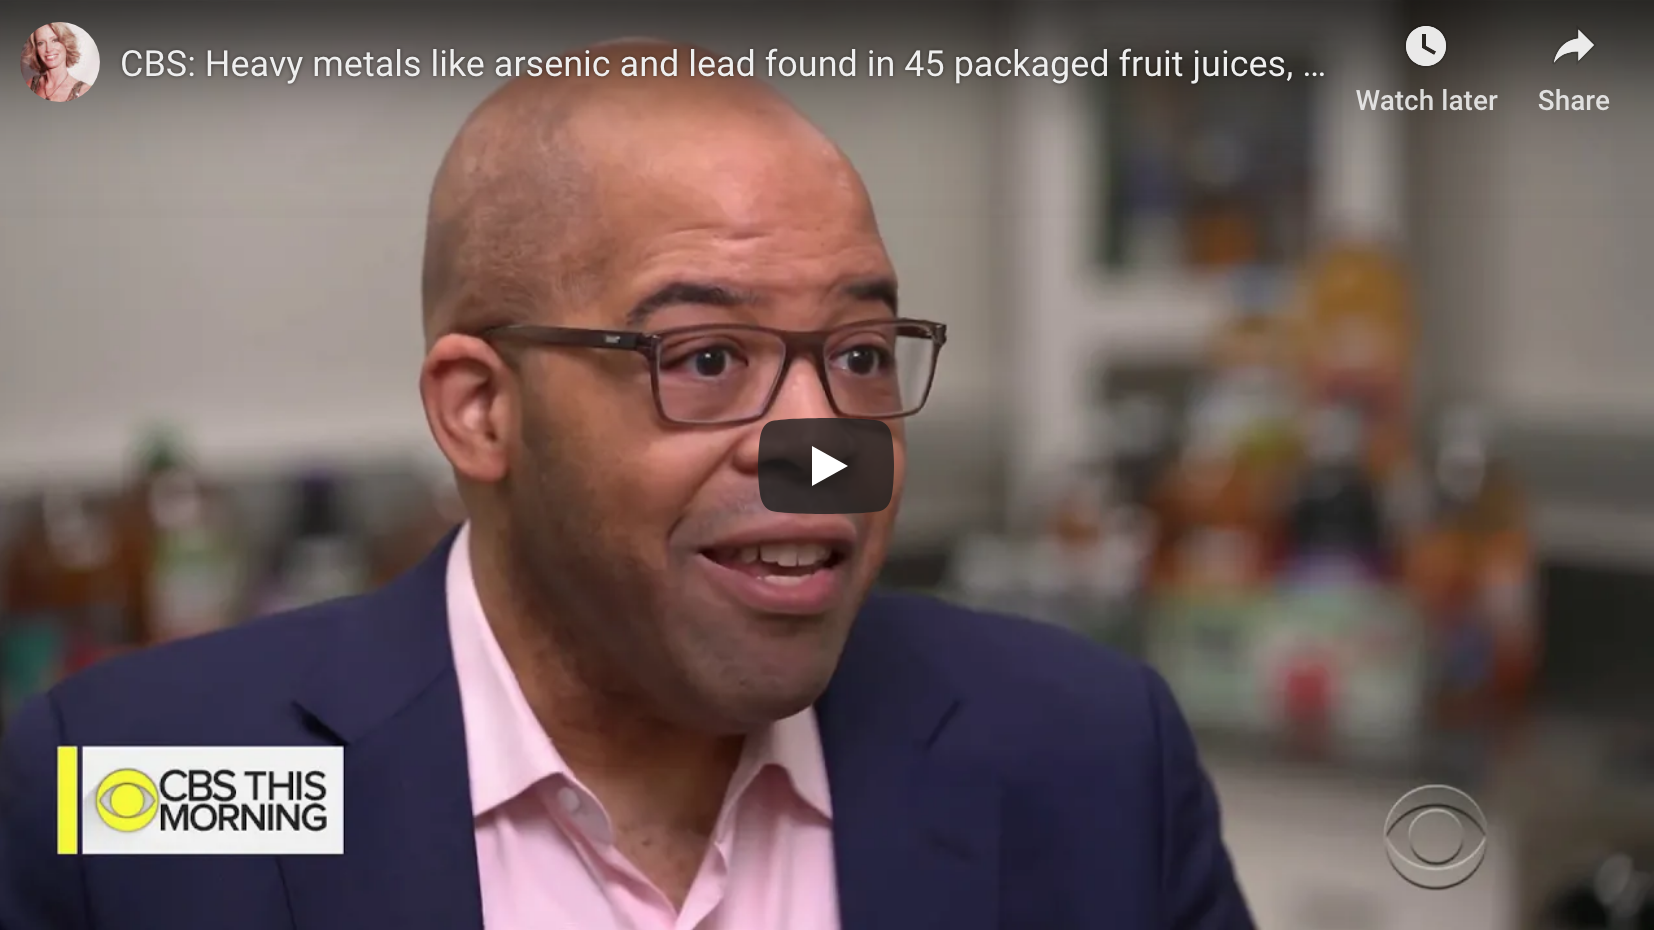 CBS: New report finds heavy metals like arsenic and lead in 45 packaged fruit juices